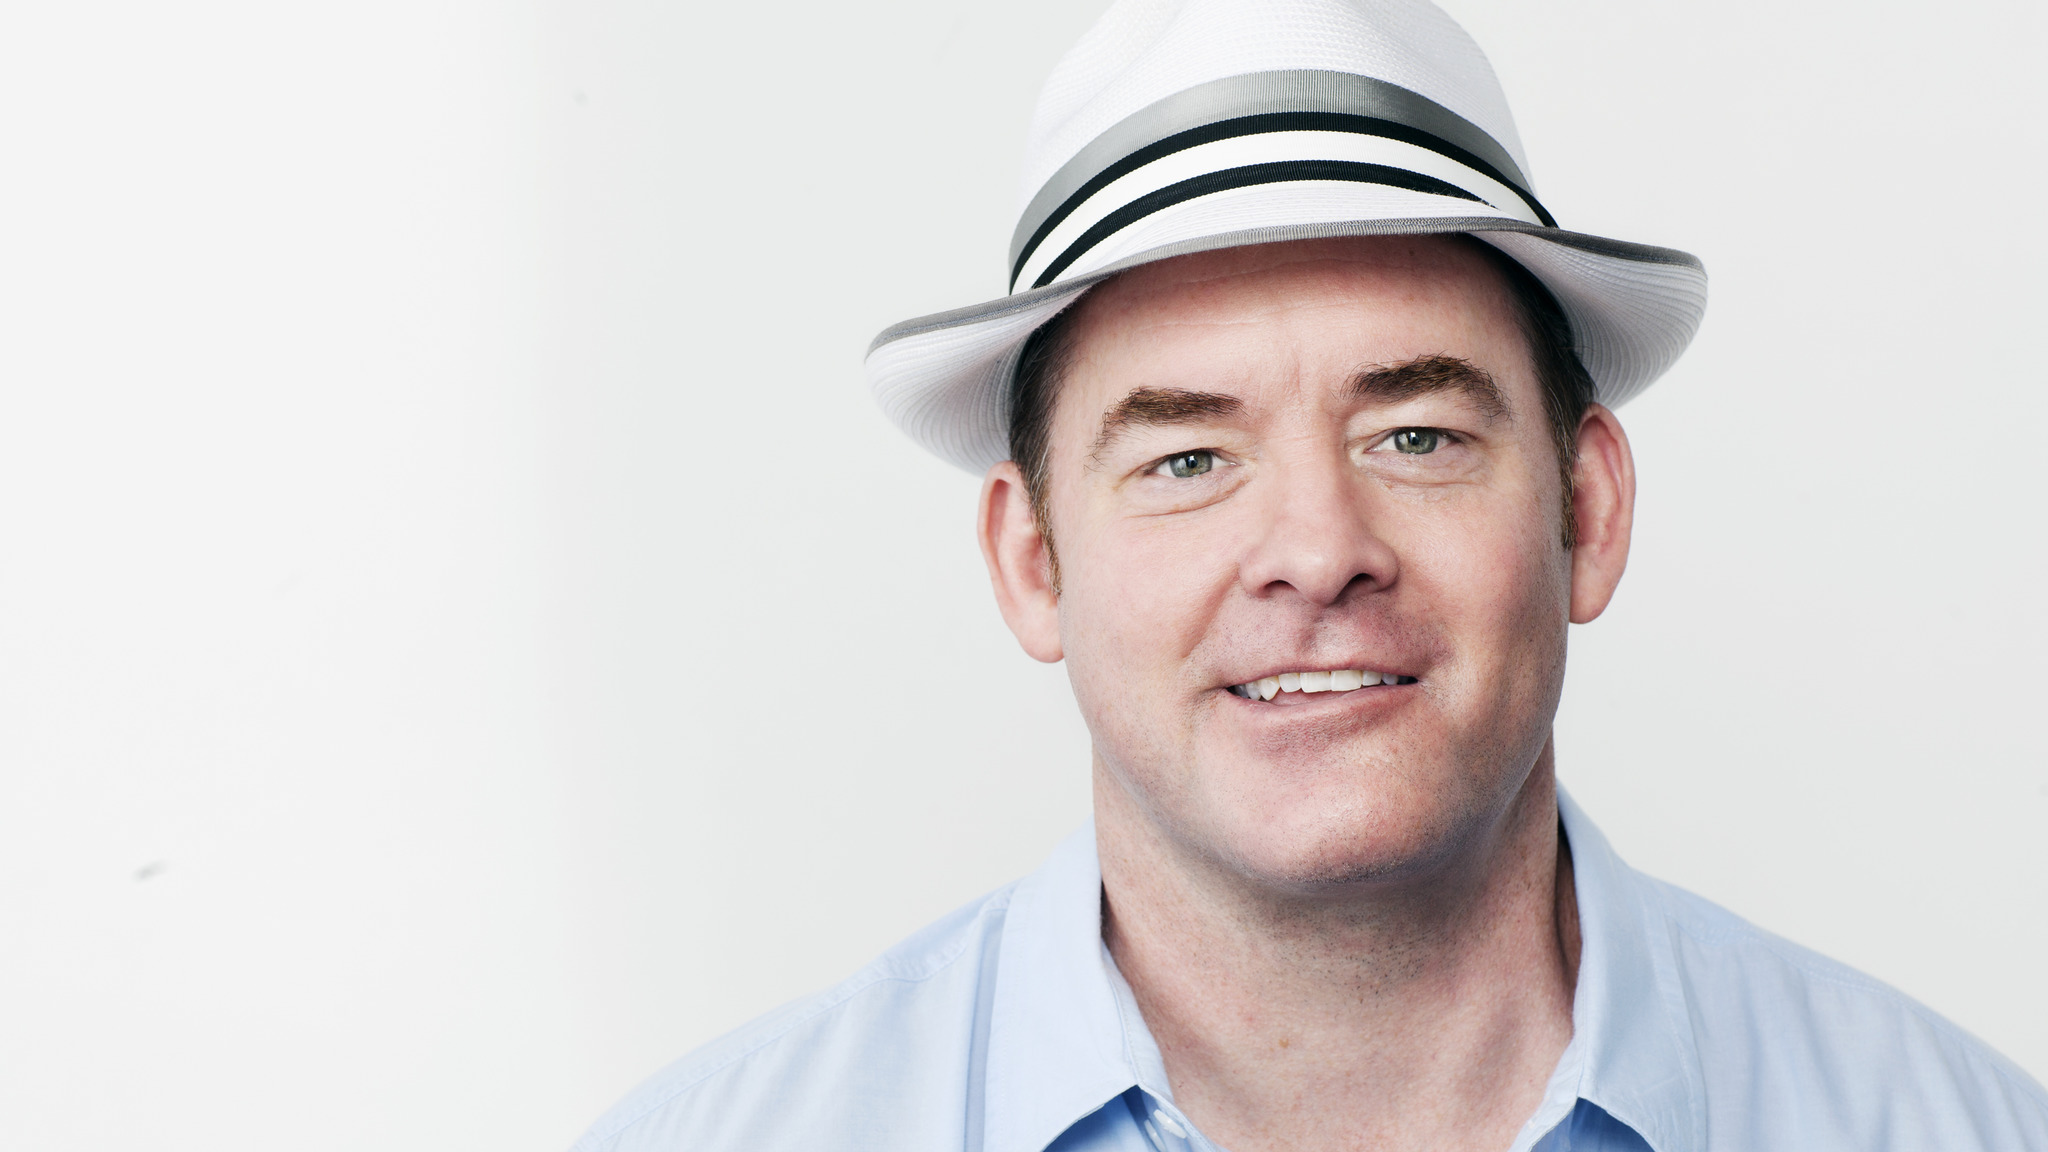 The Office Trivia hosted by Todd Packer starring David Koechner 